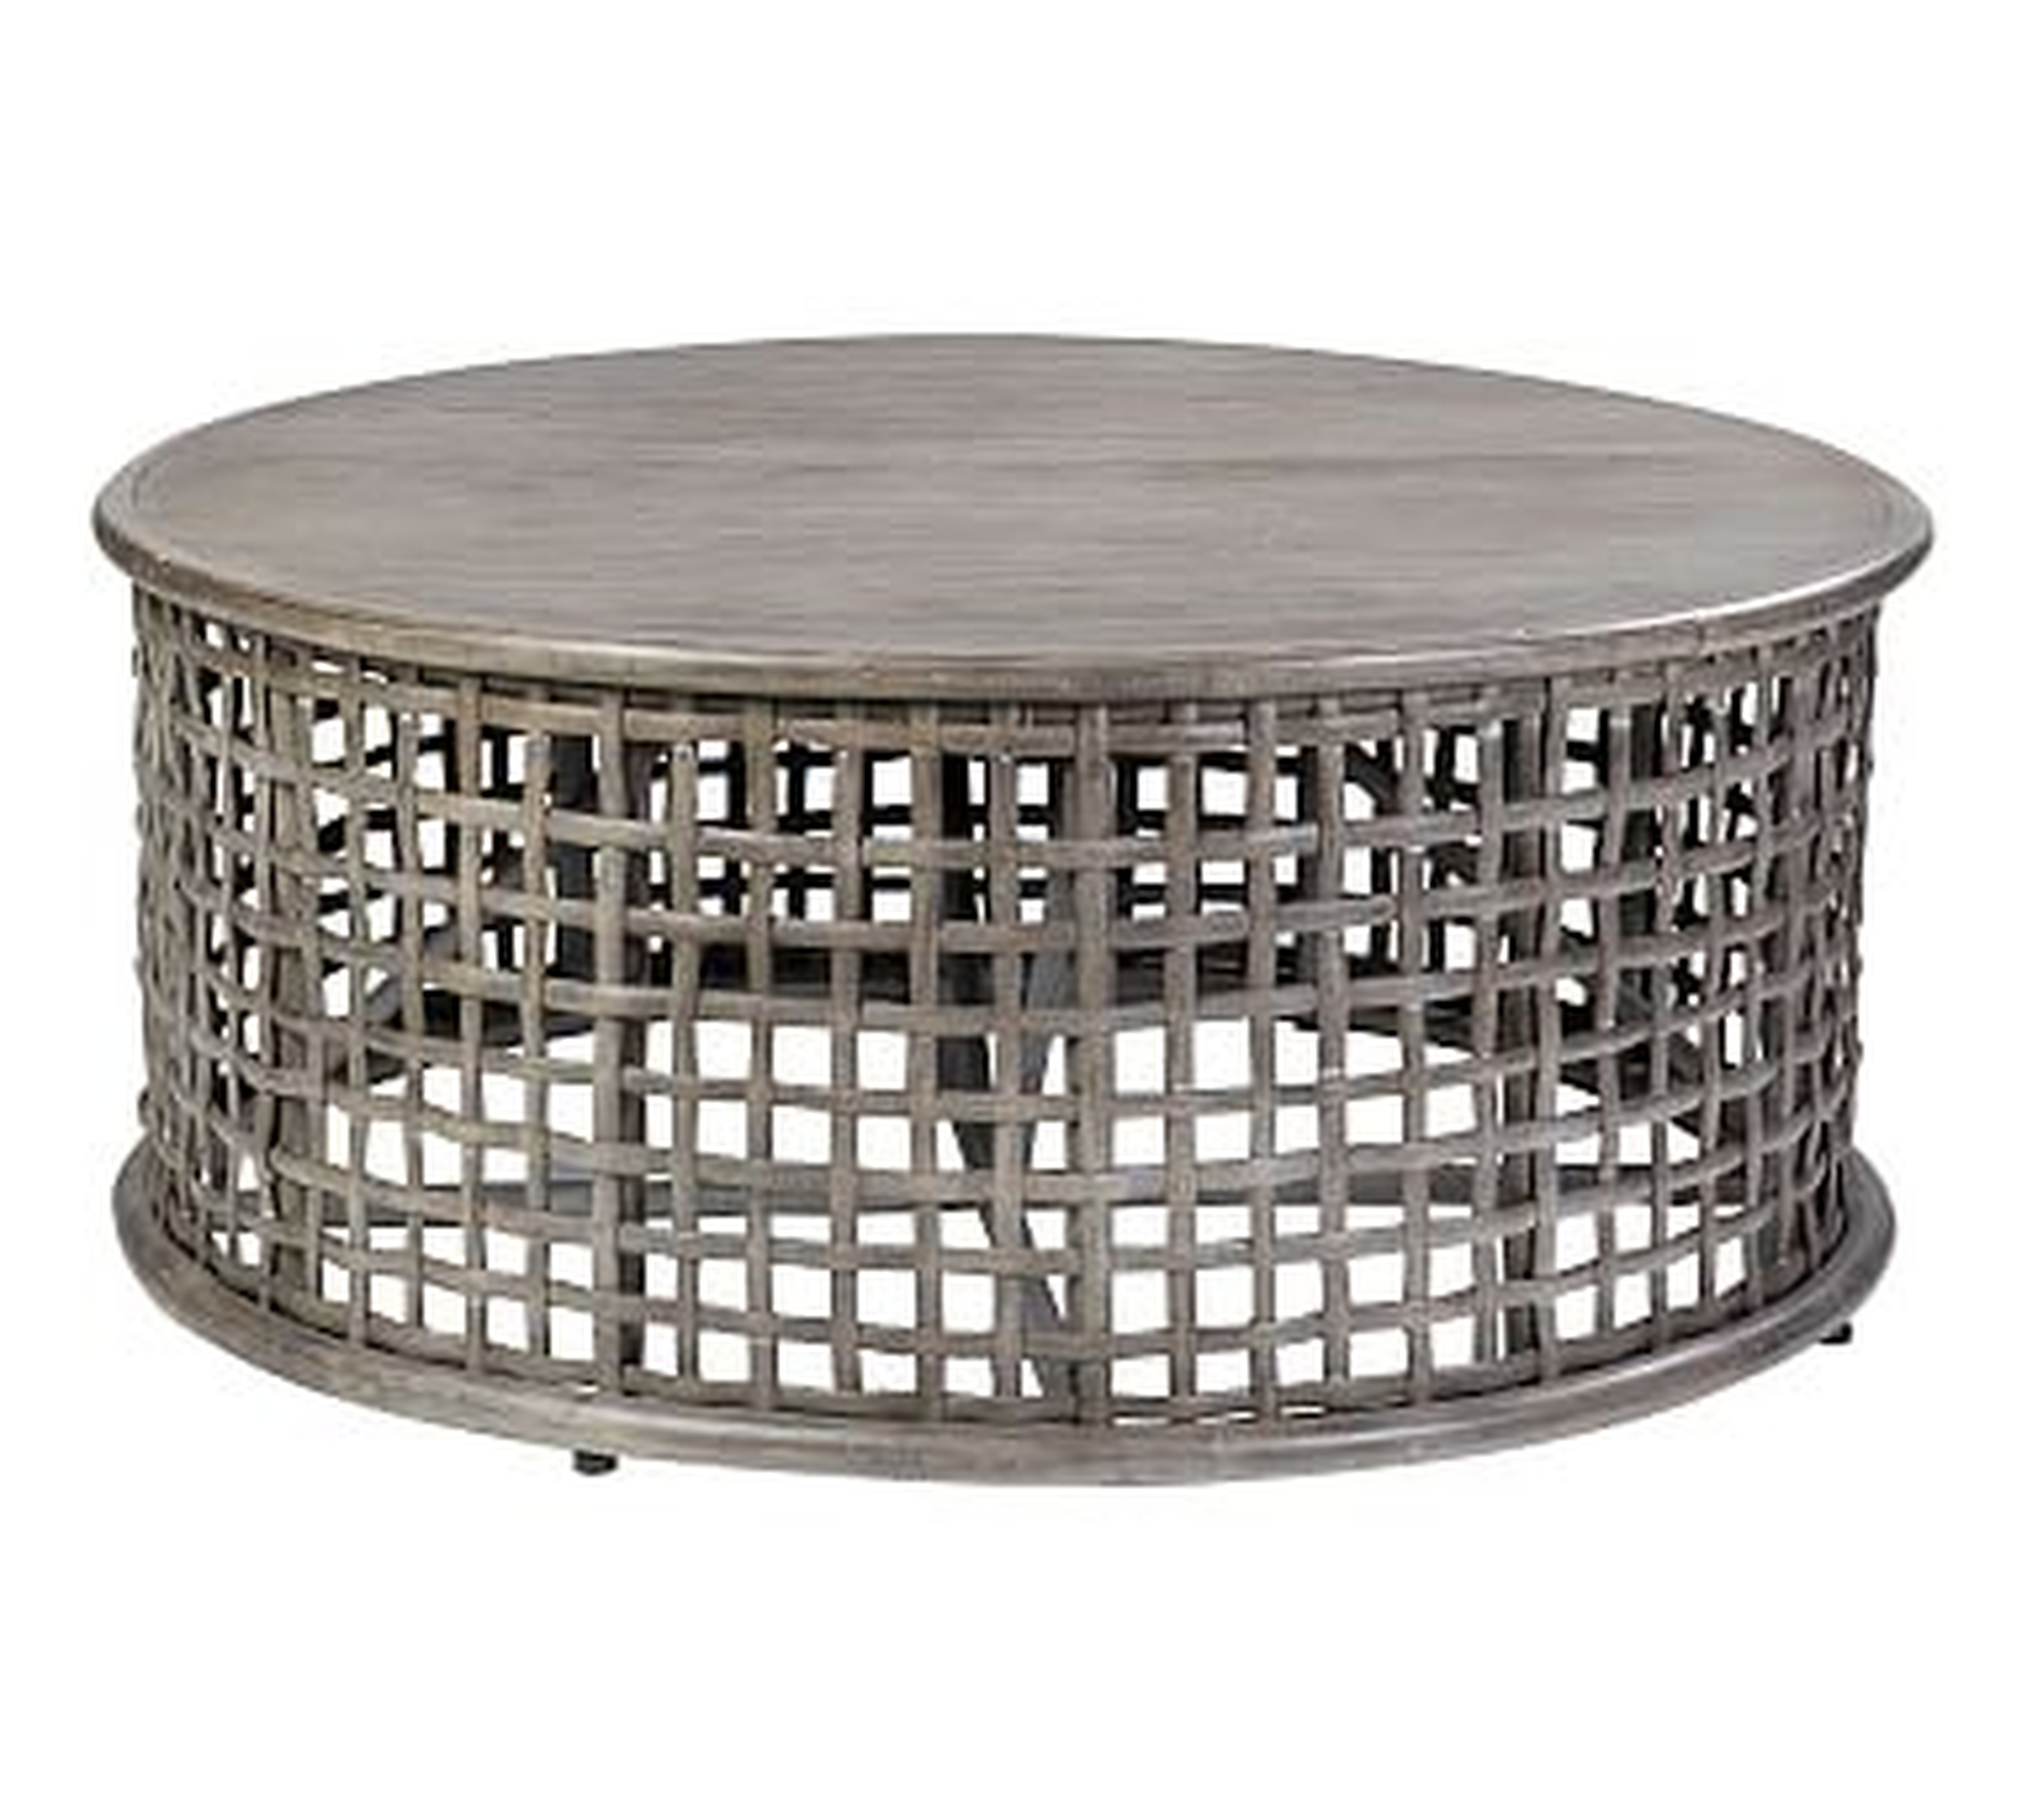 Open Weave Rattan Round Coffee Table, Gray - Pottery Barn